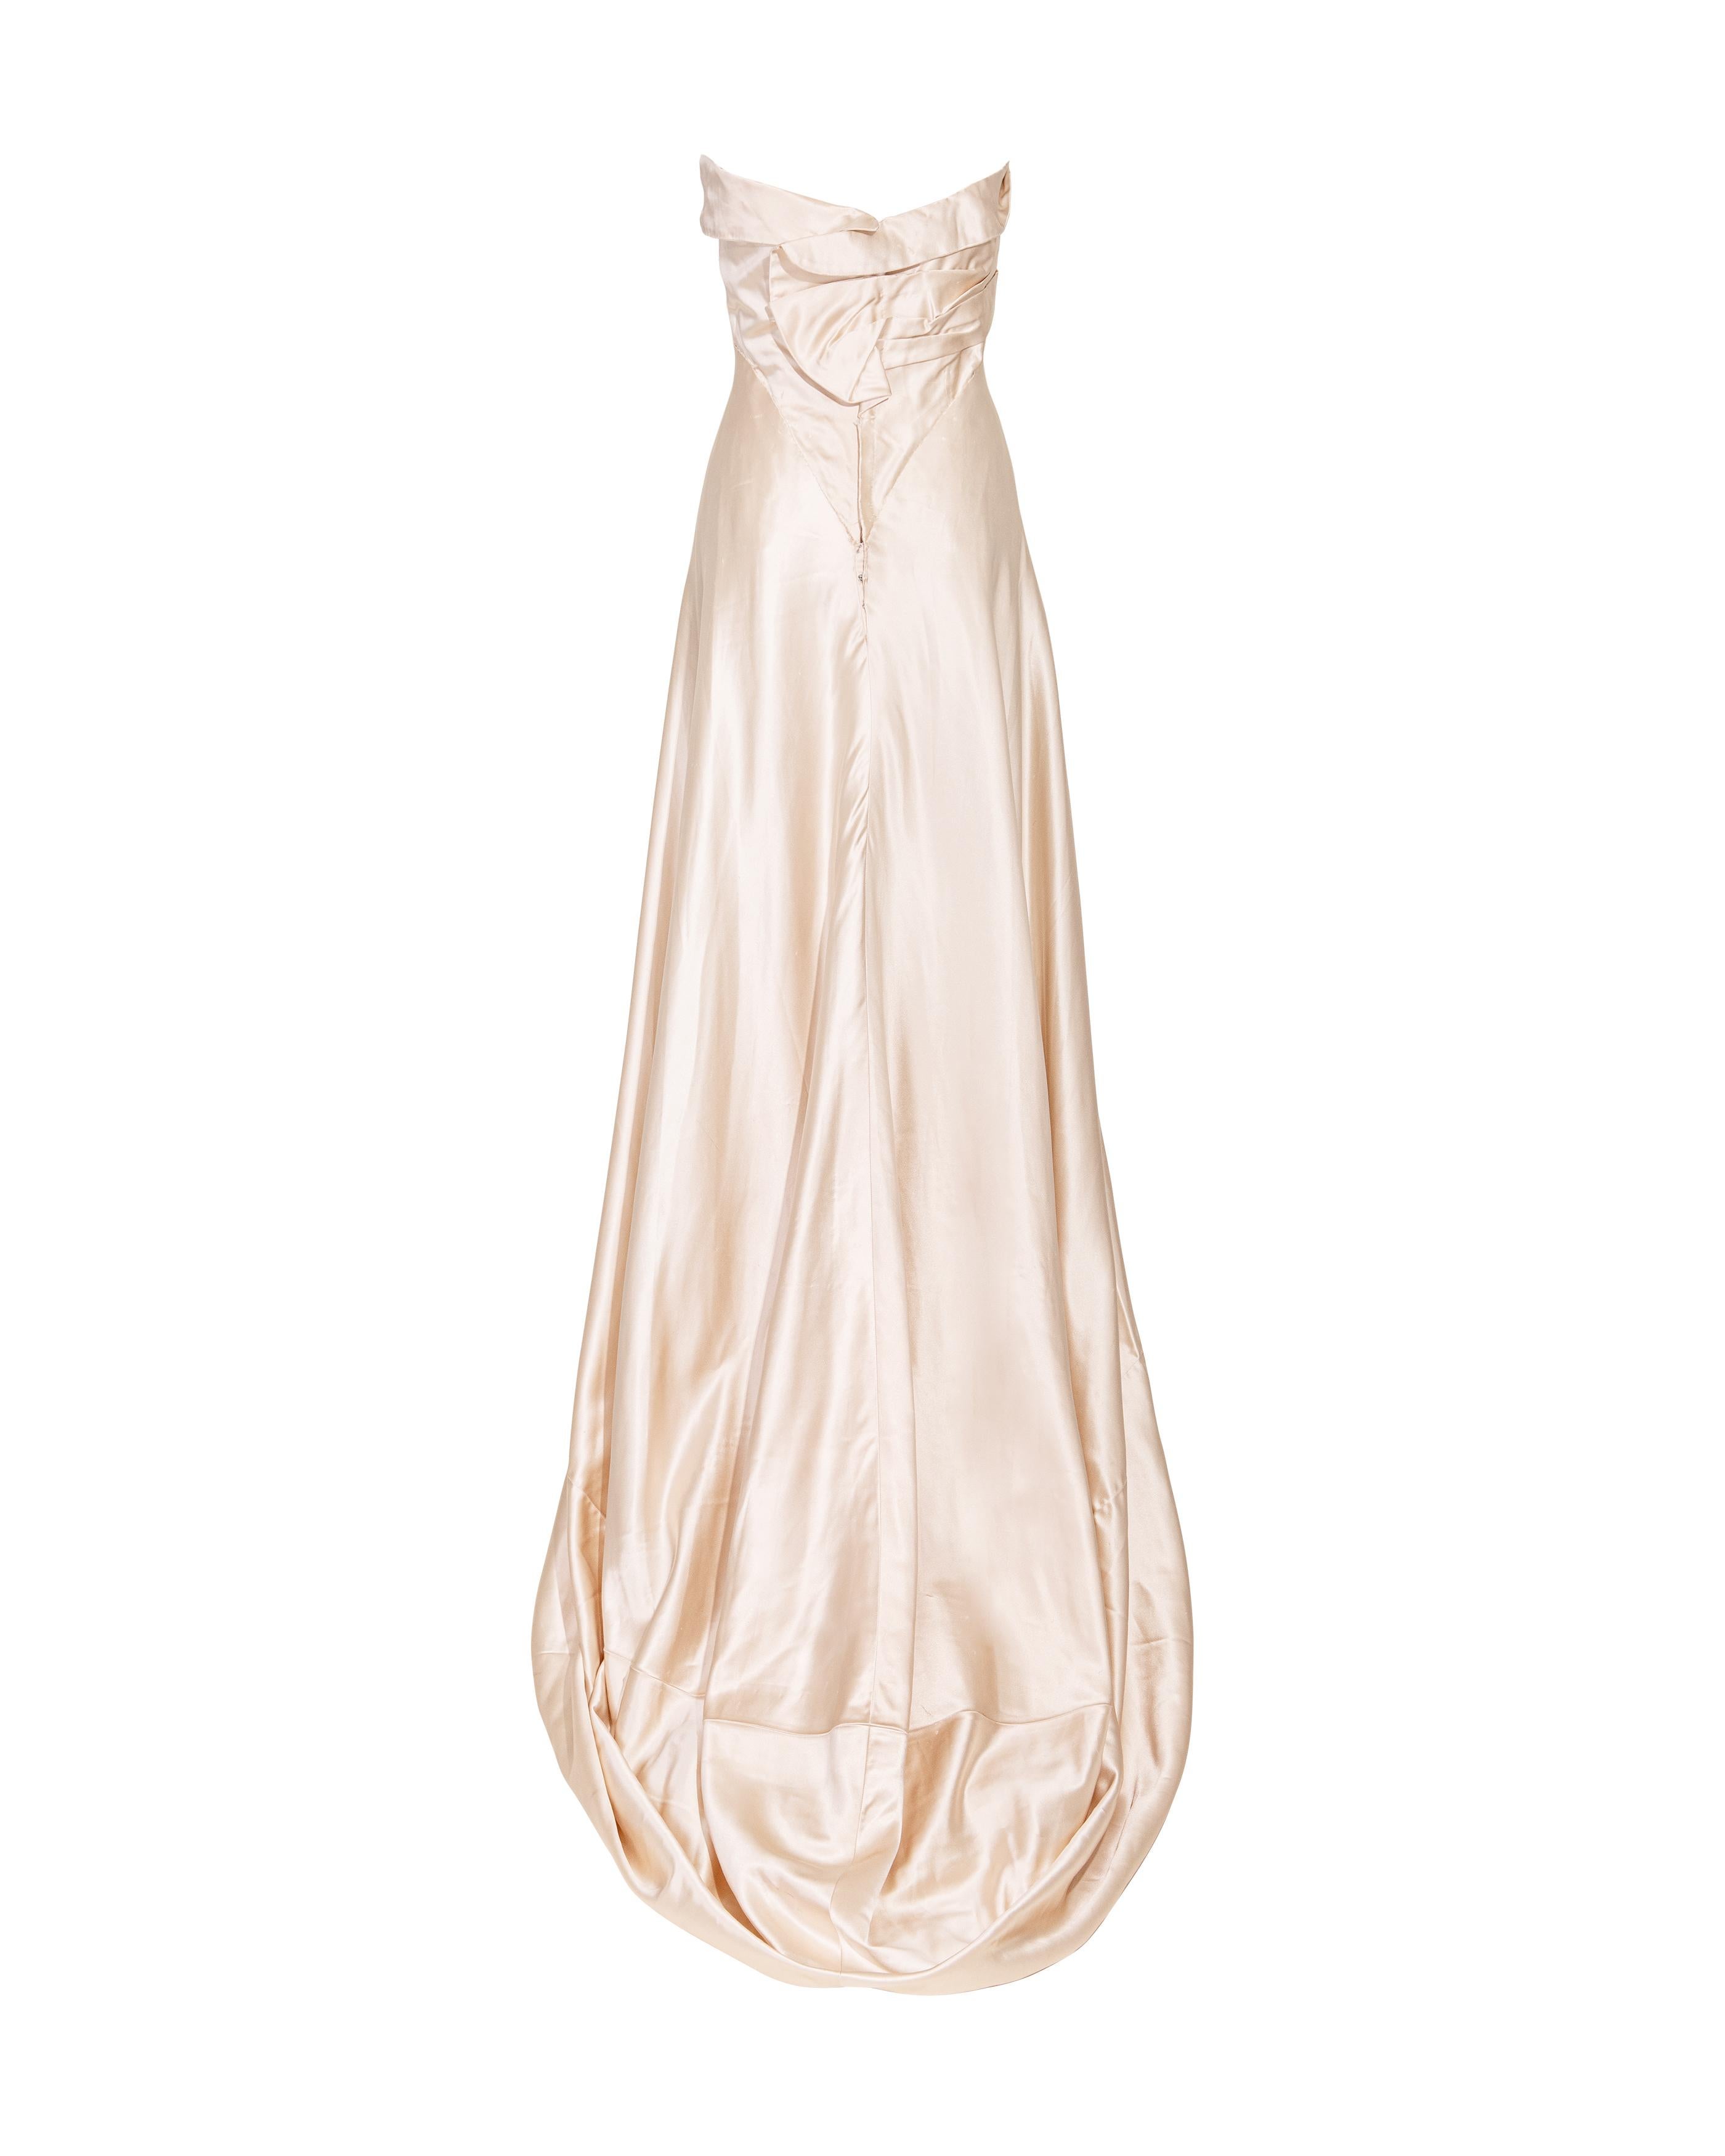 1940's Irene Lentz Haute Couture Strapless High-Low Cream Silk Gown For Sale 1